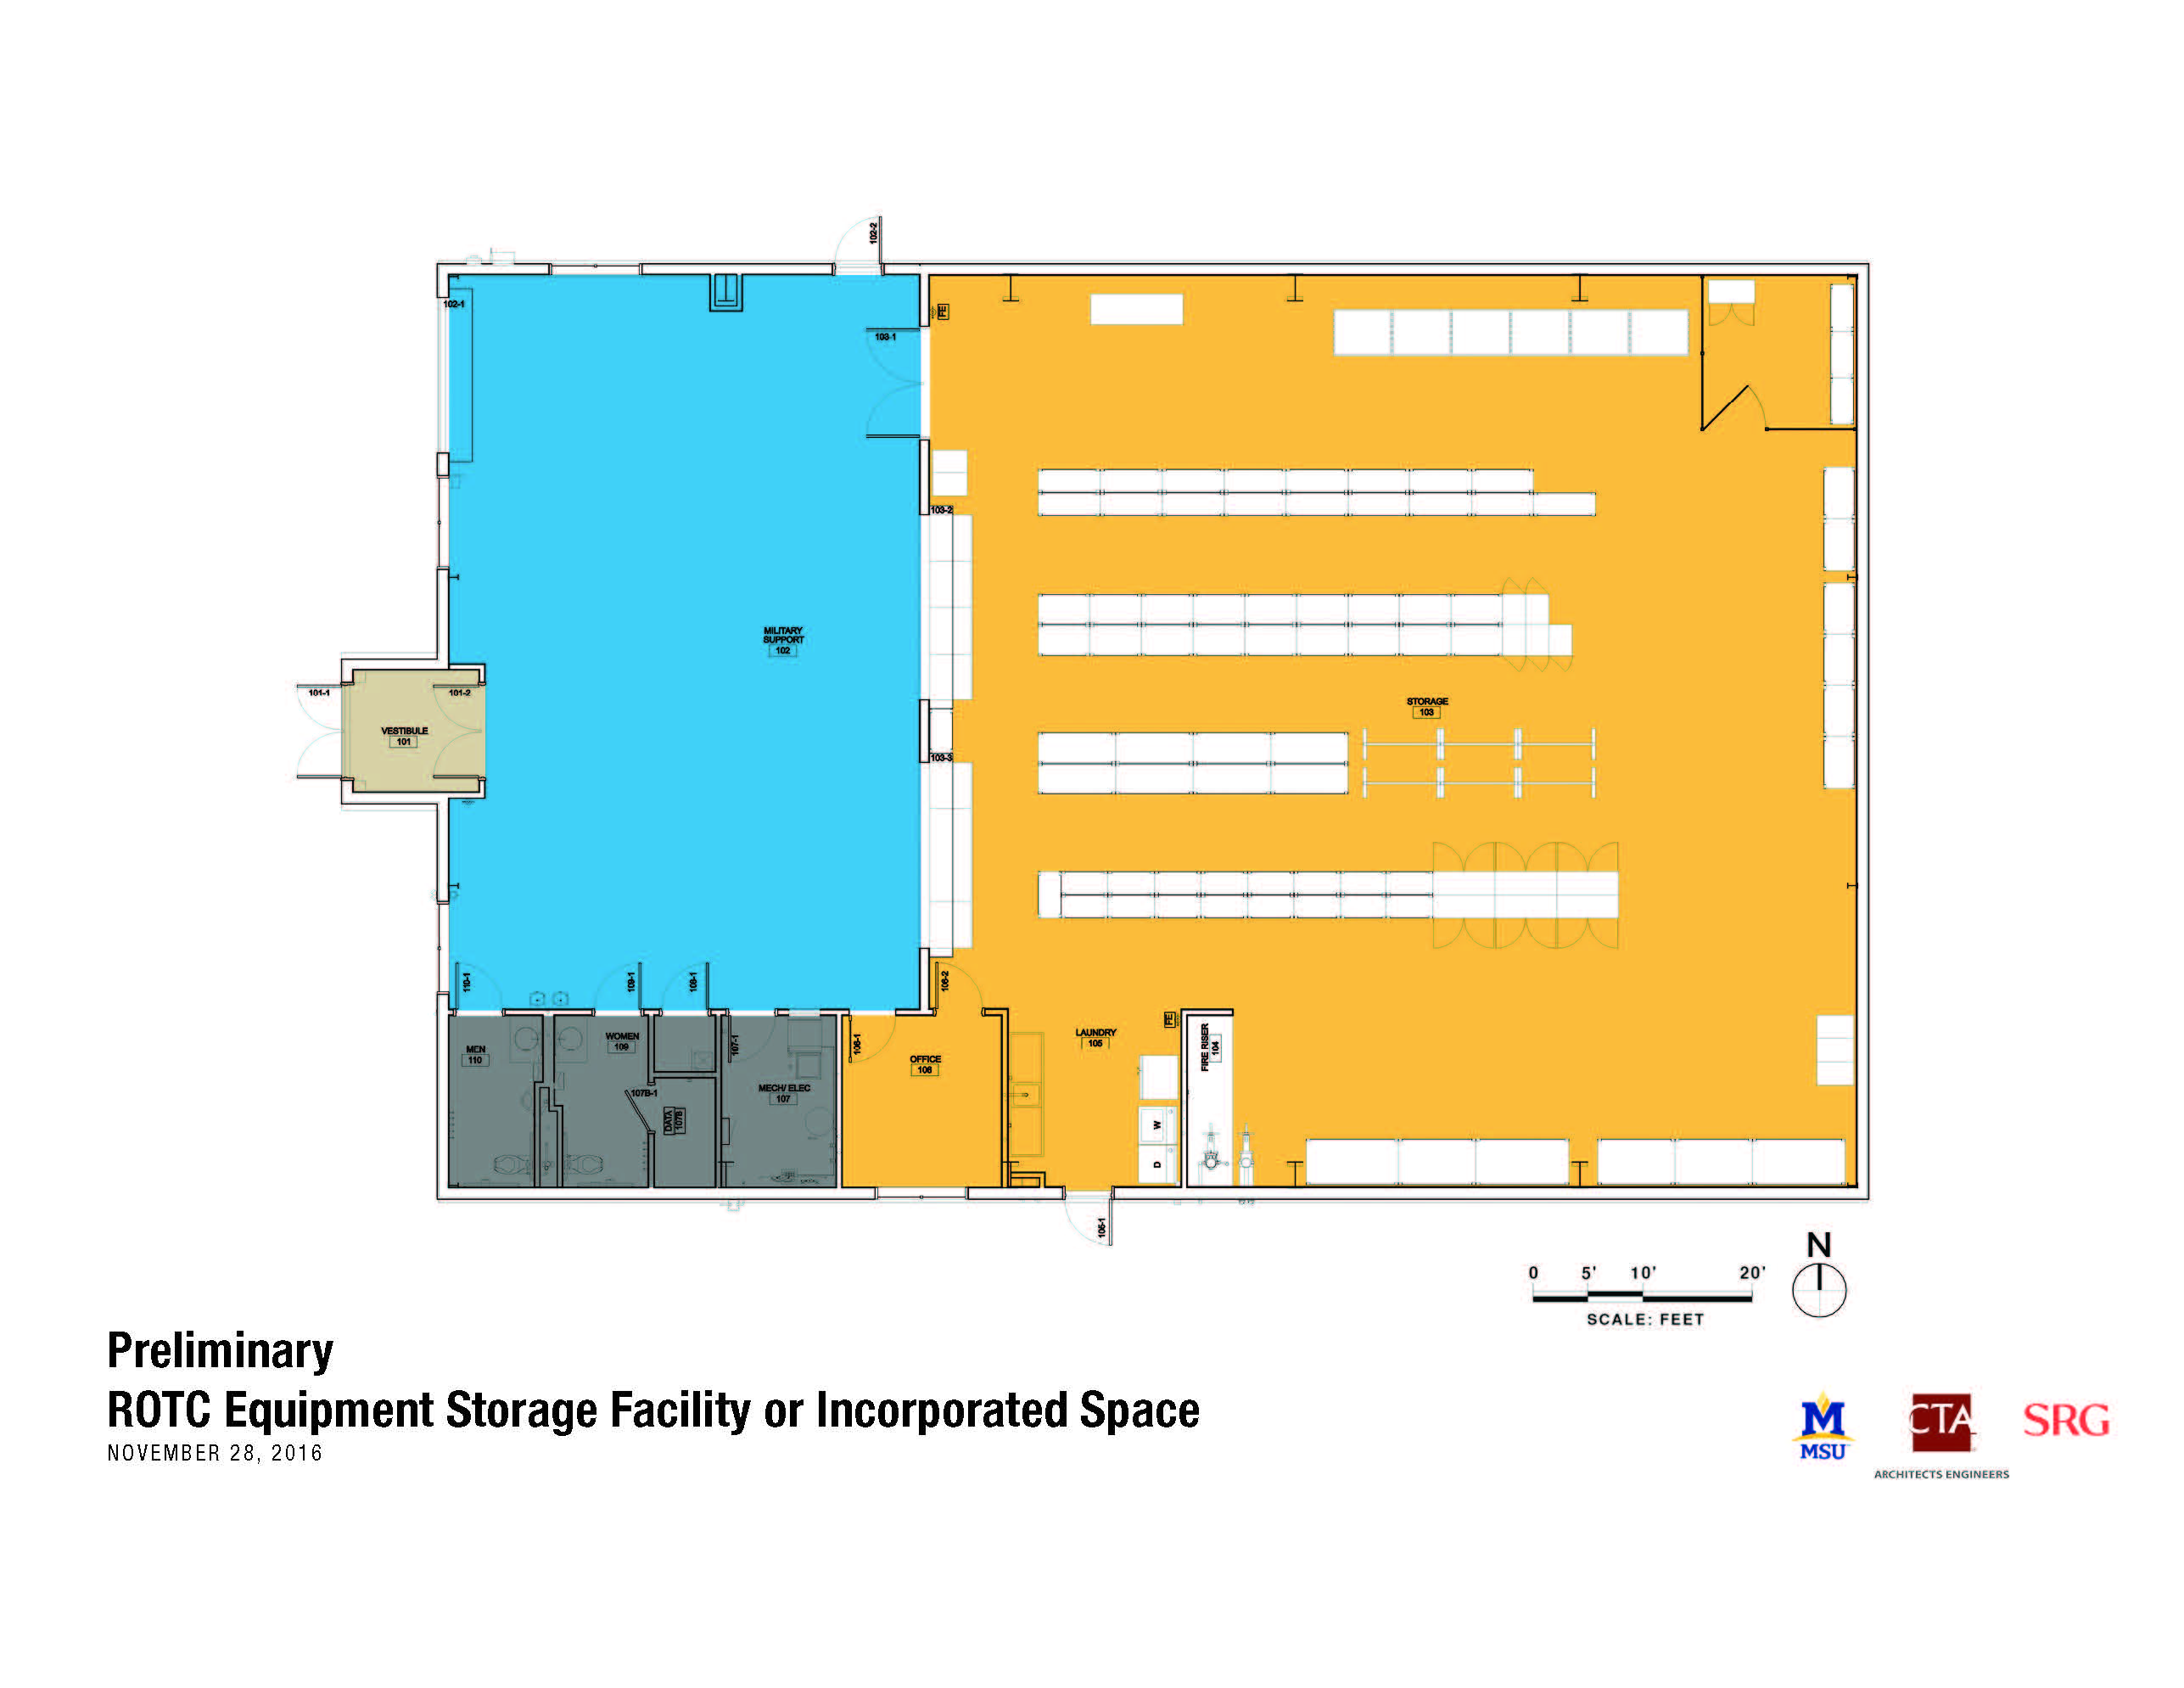 Preliminary floorplans for an ROTC Equipment Storage Facility or incorporated space.